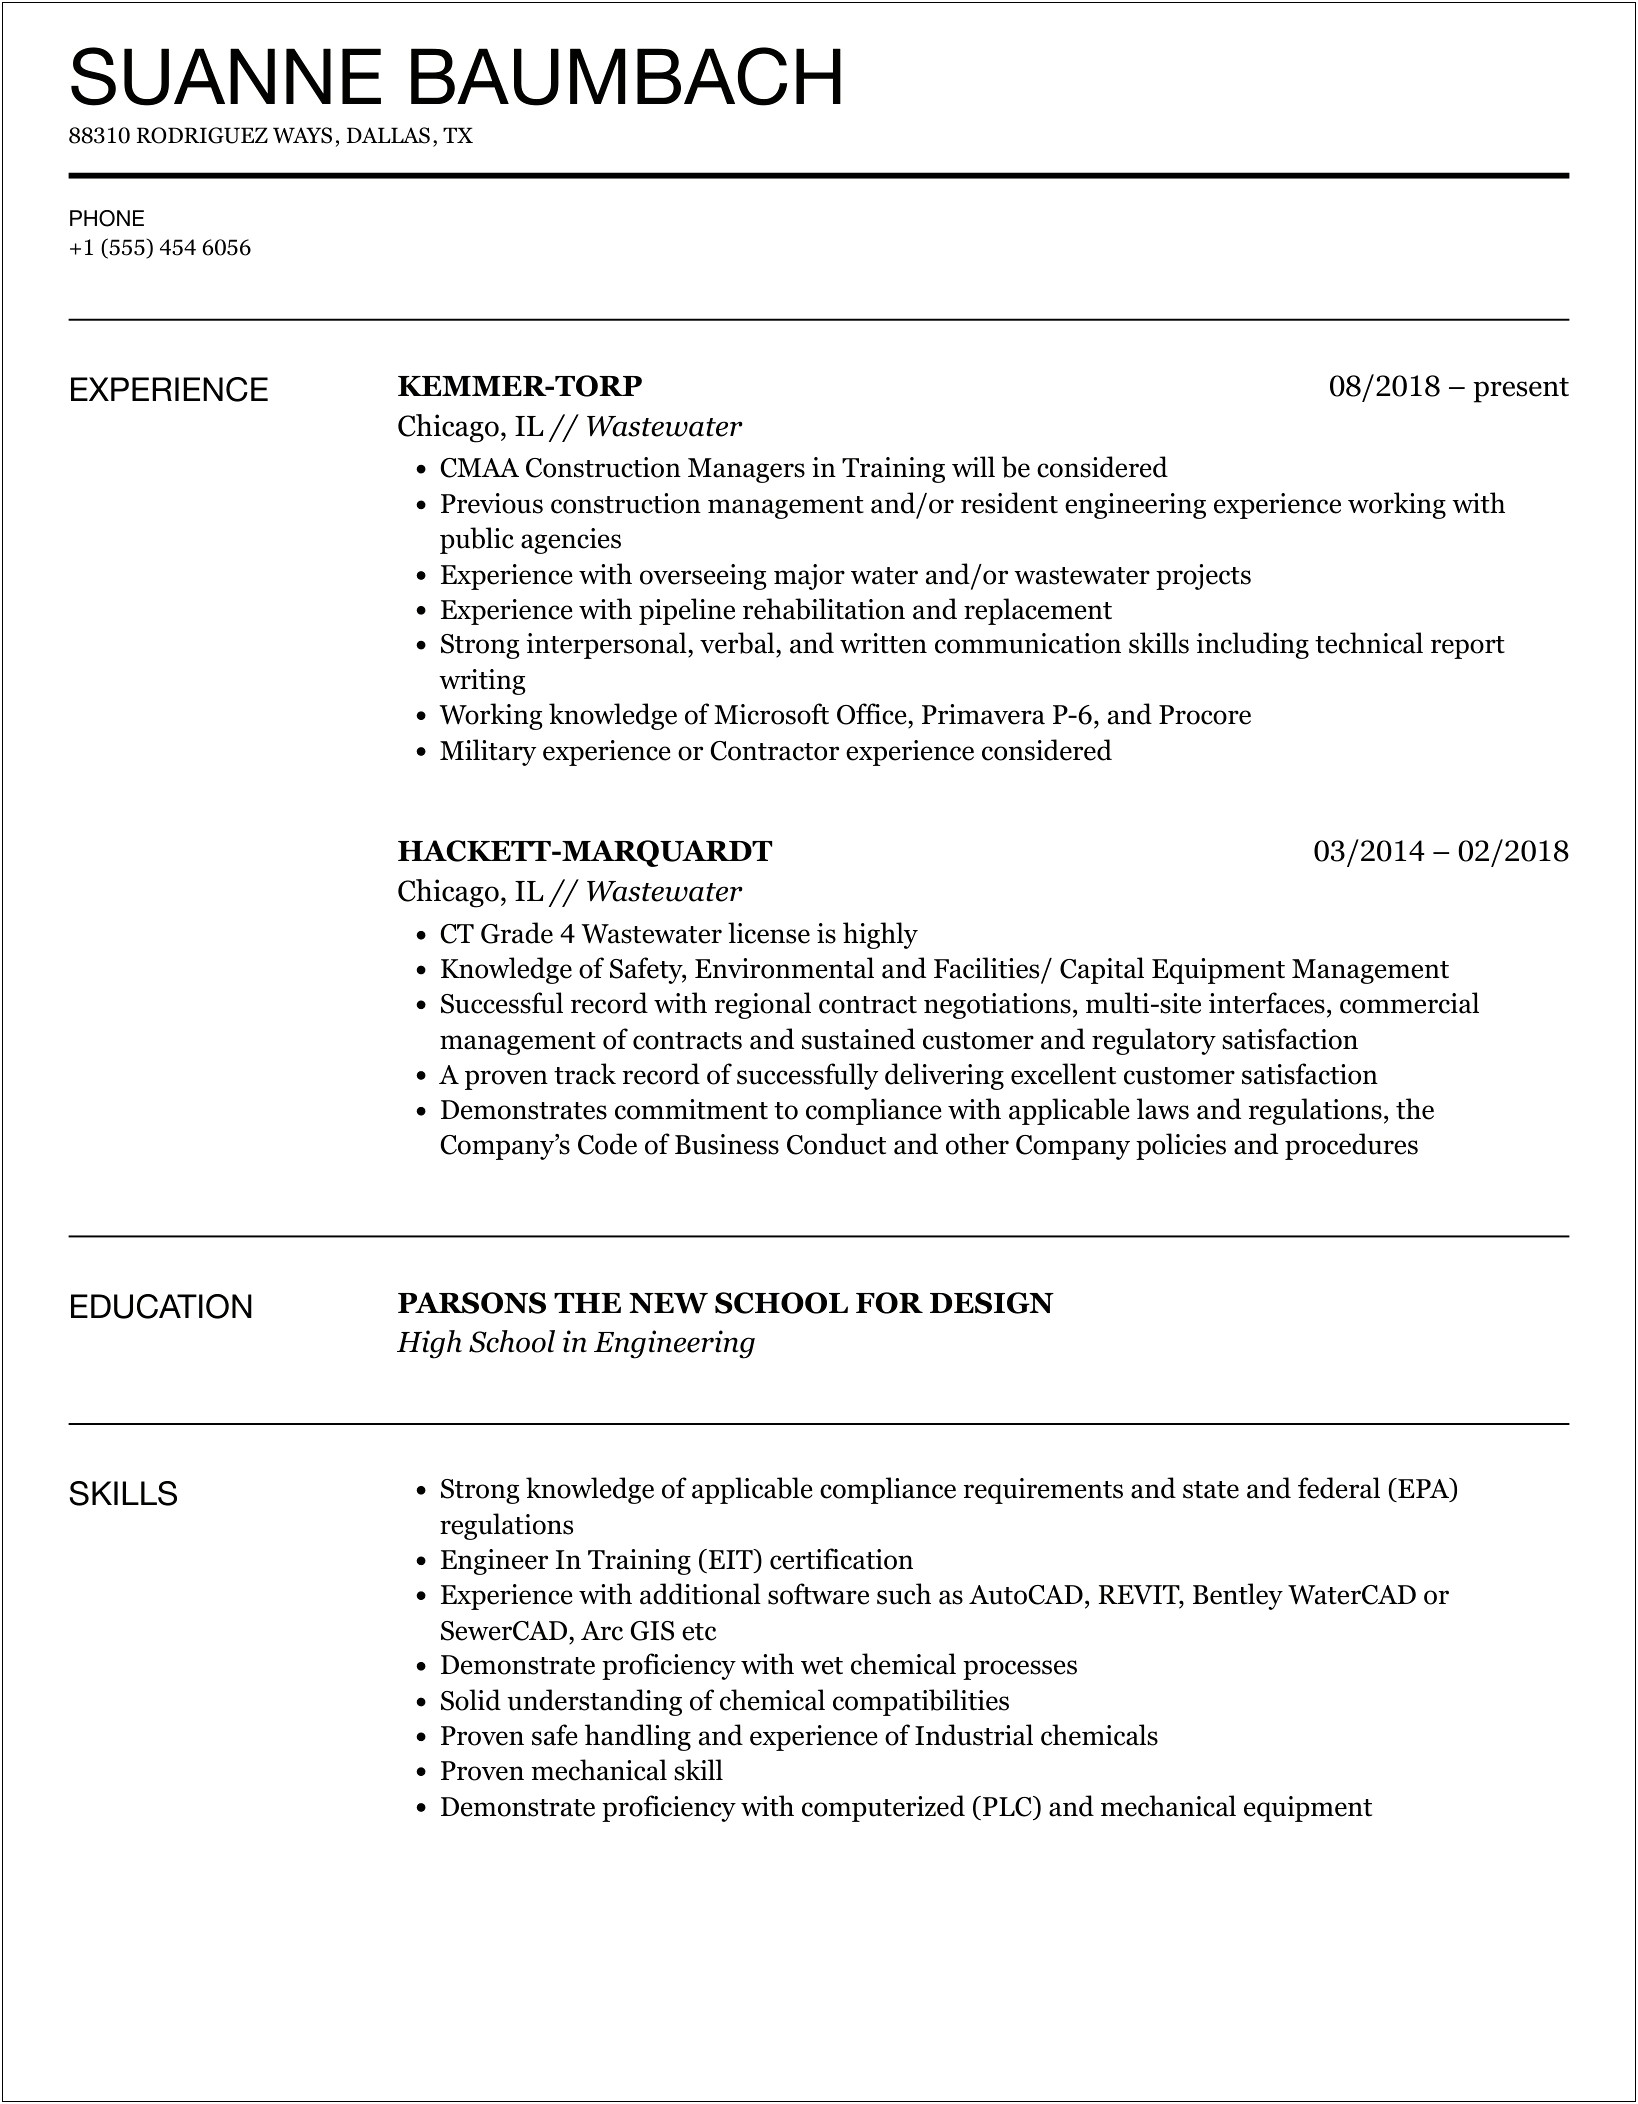 Free Resume Templates For Wastewater Recycling Tech